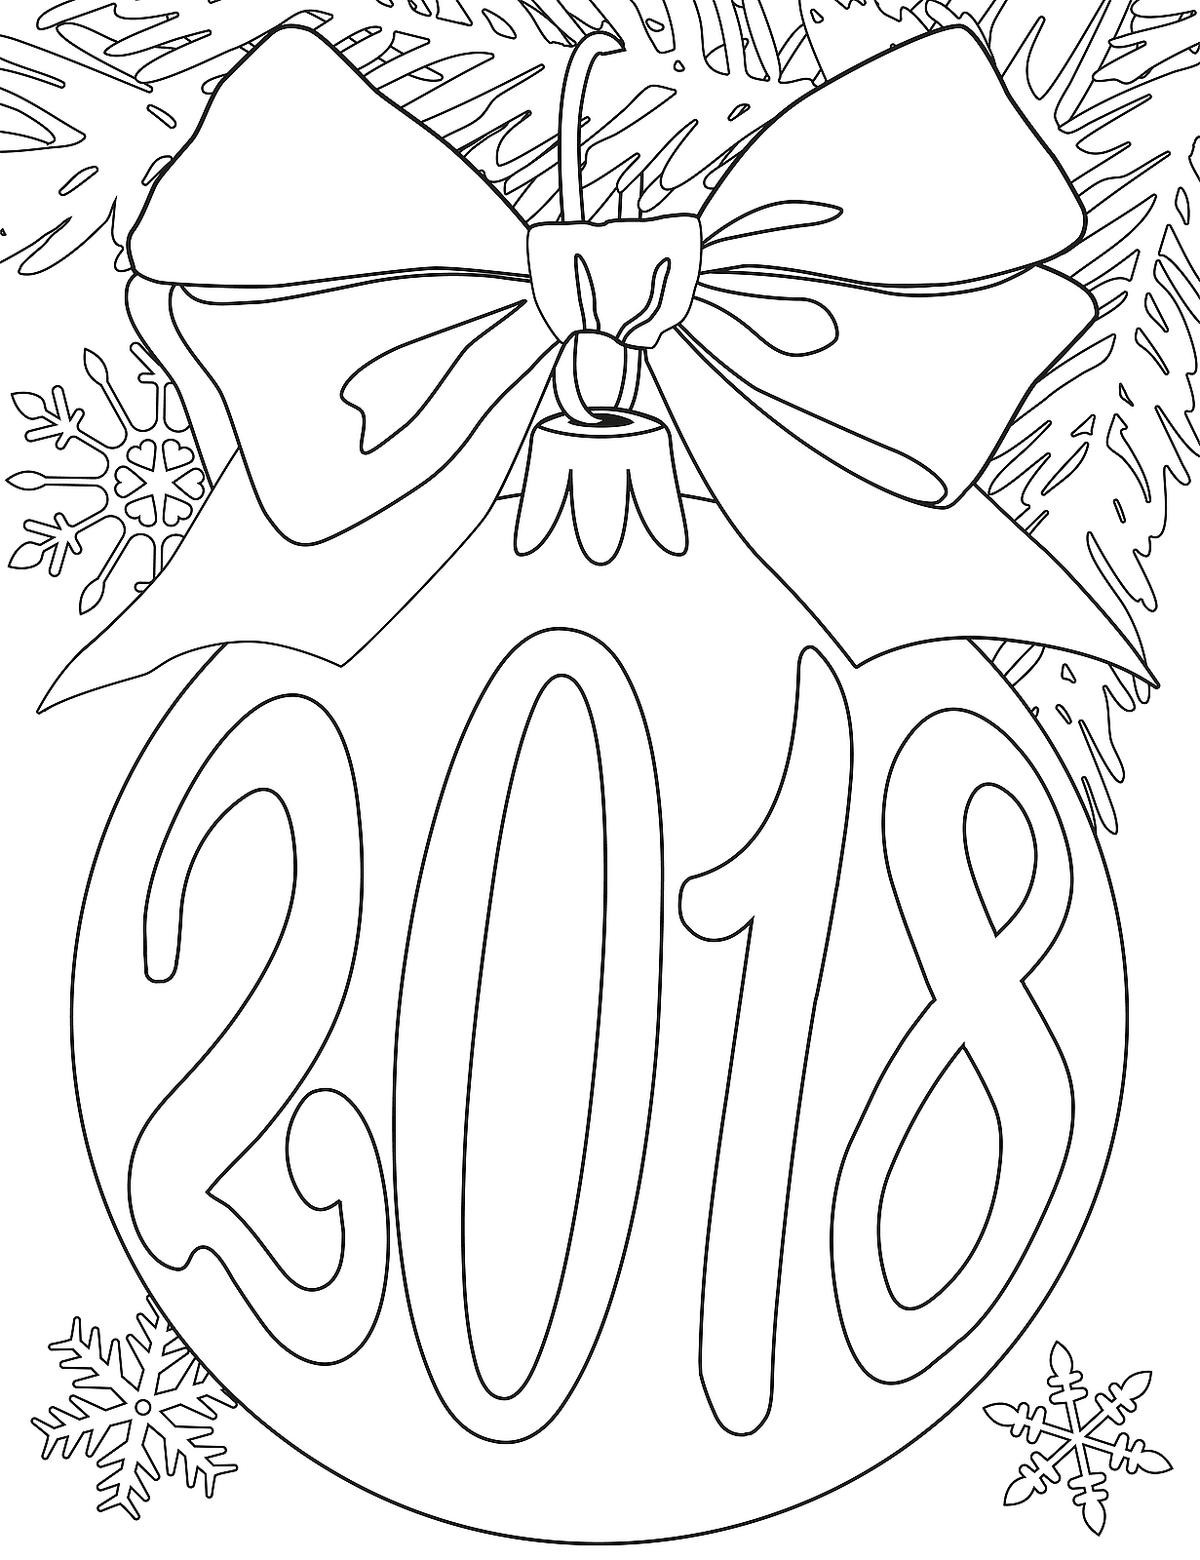 Months Of The Year Coloring Pages at GetColorings.com | Free printable